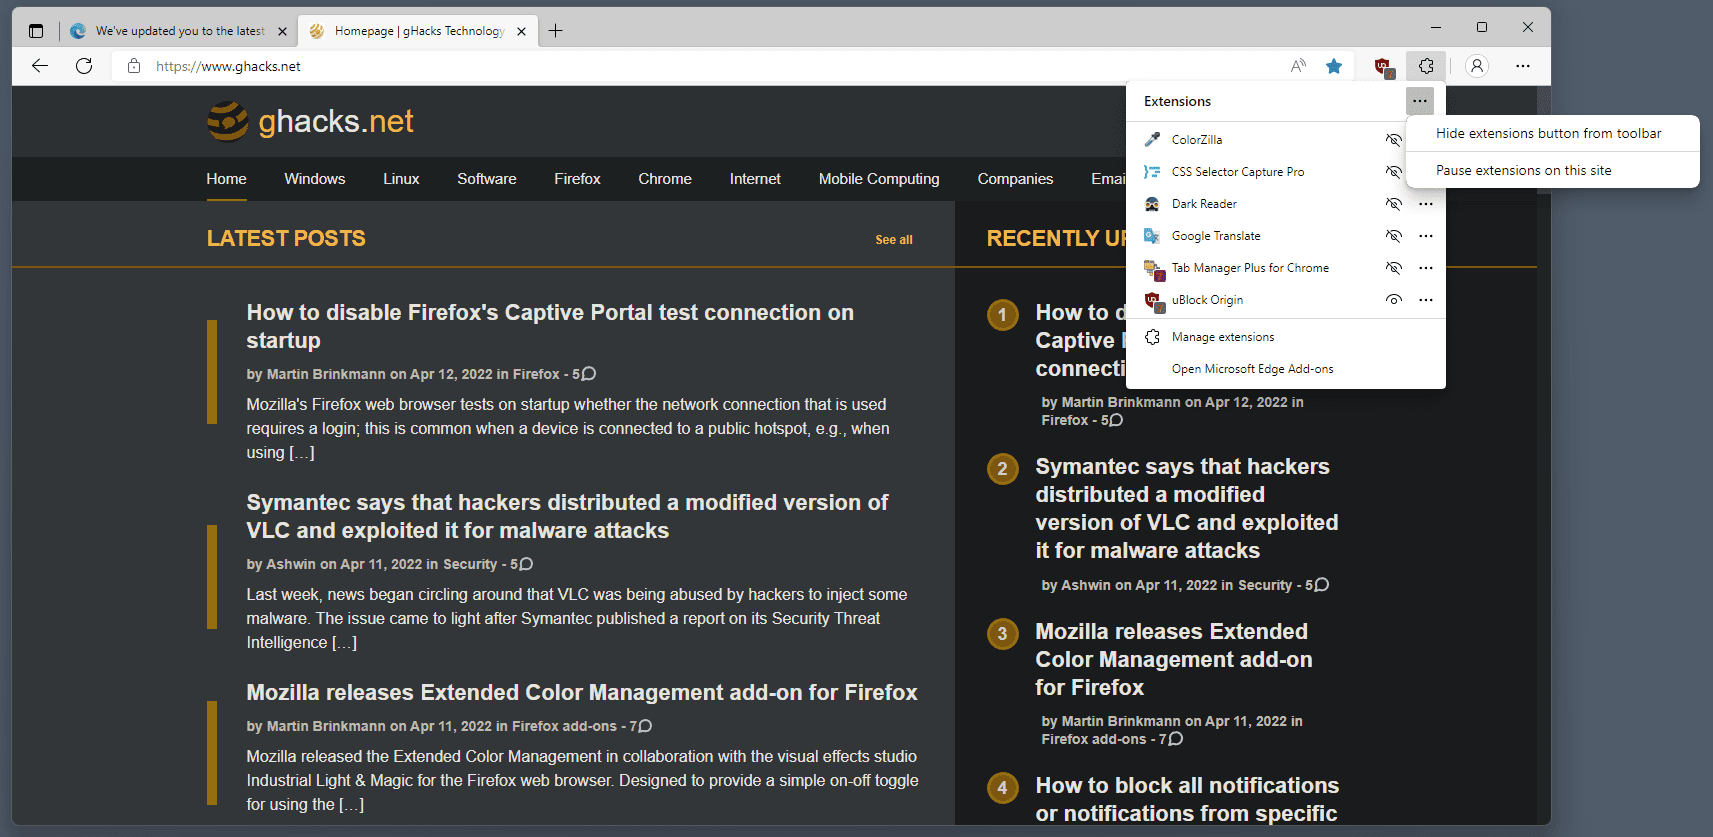 microsoft edge pause extensions